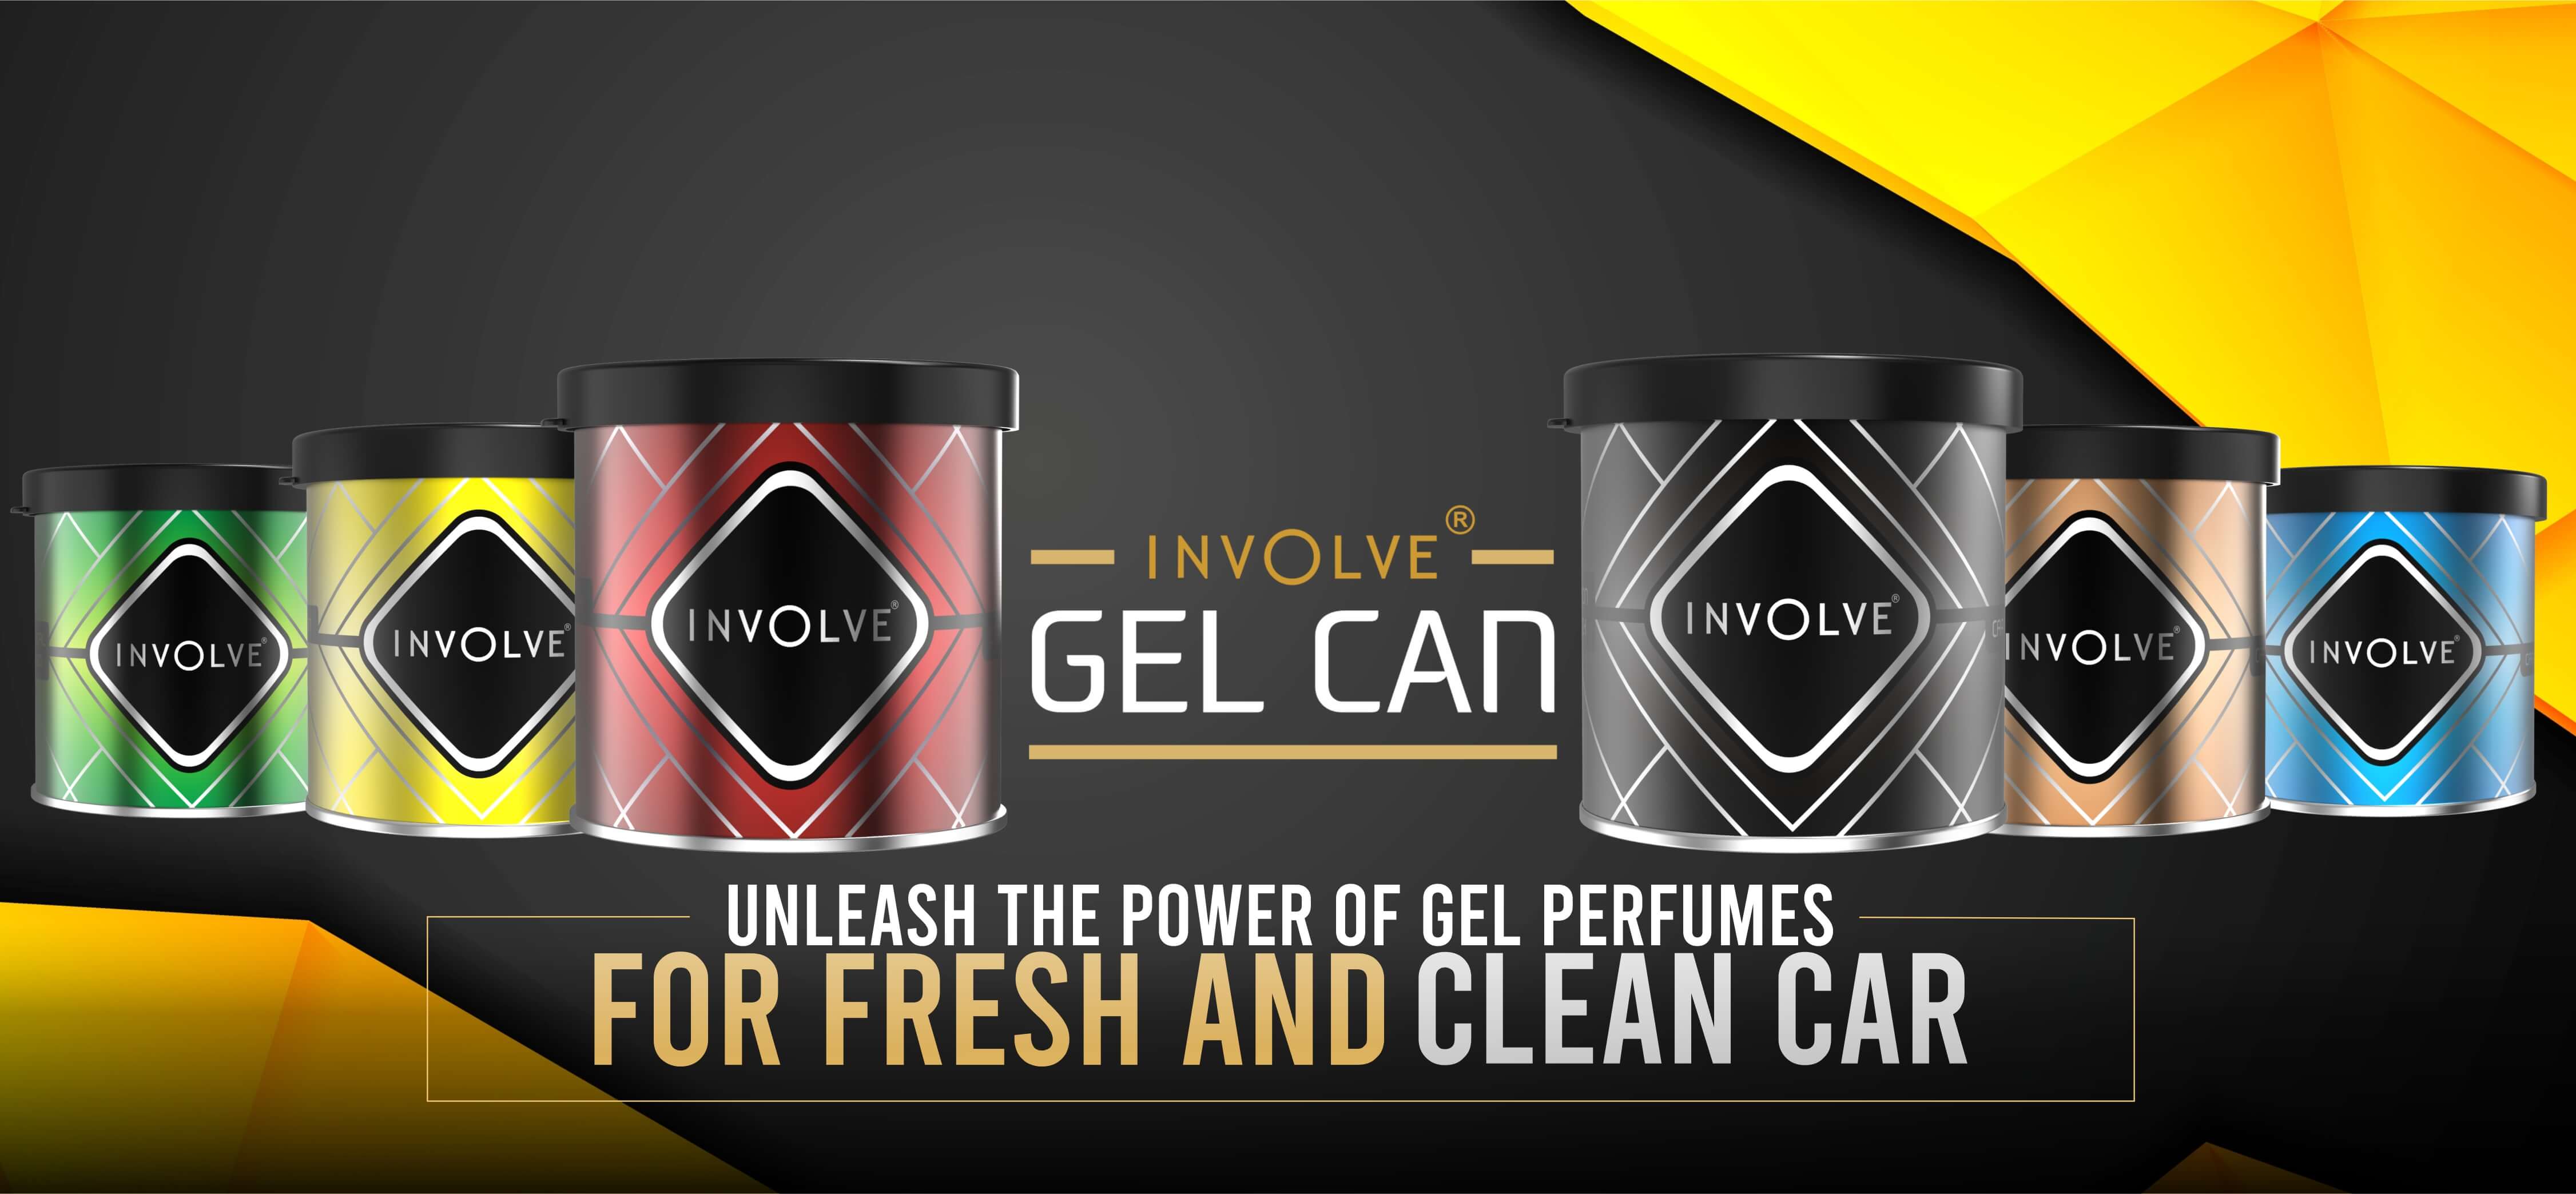 Unleash the Power of Gel Perfumes for a Fresh and Clean Car